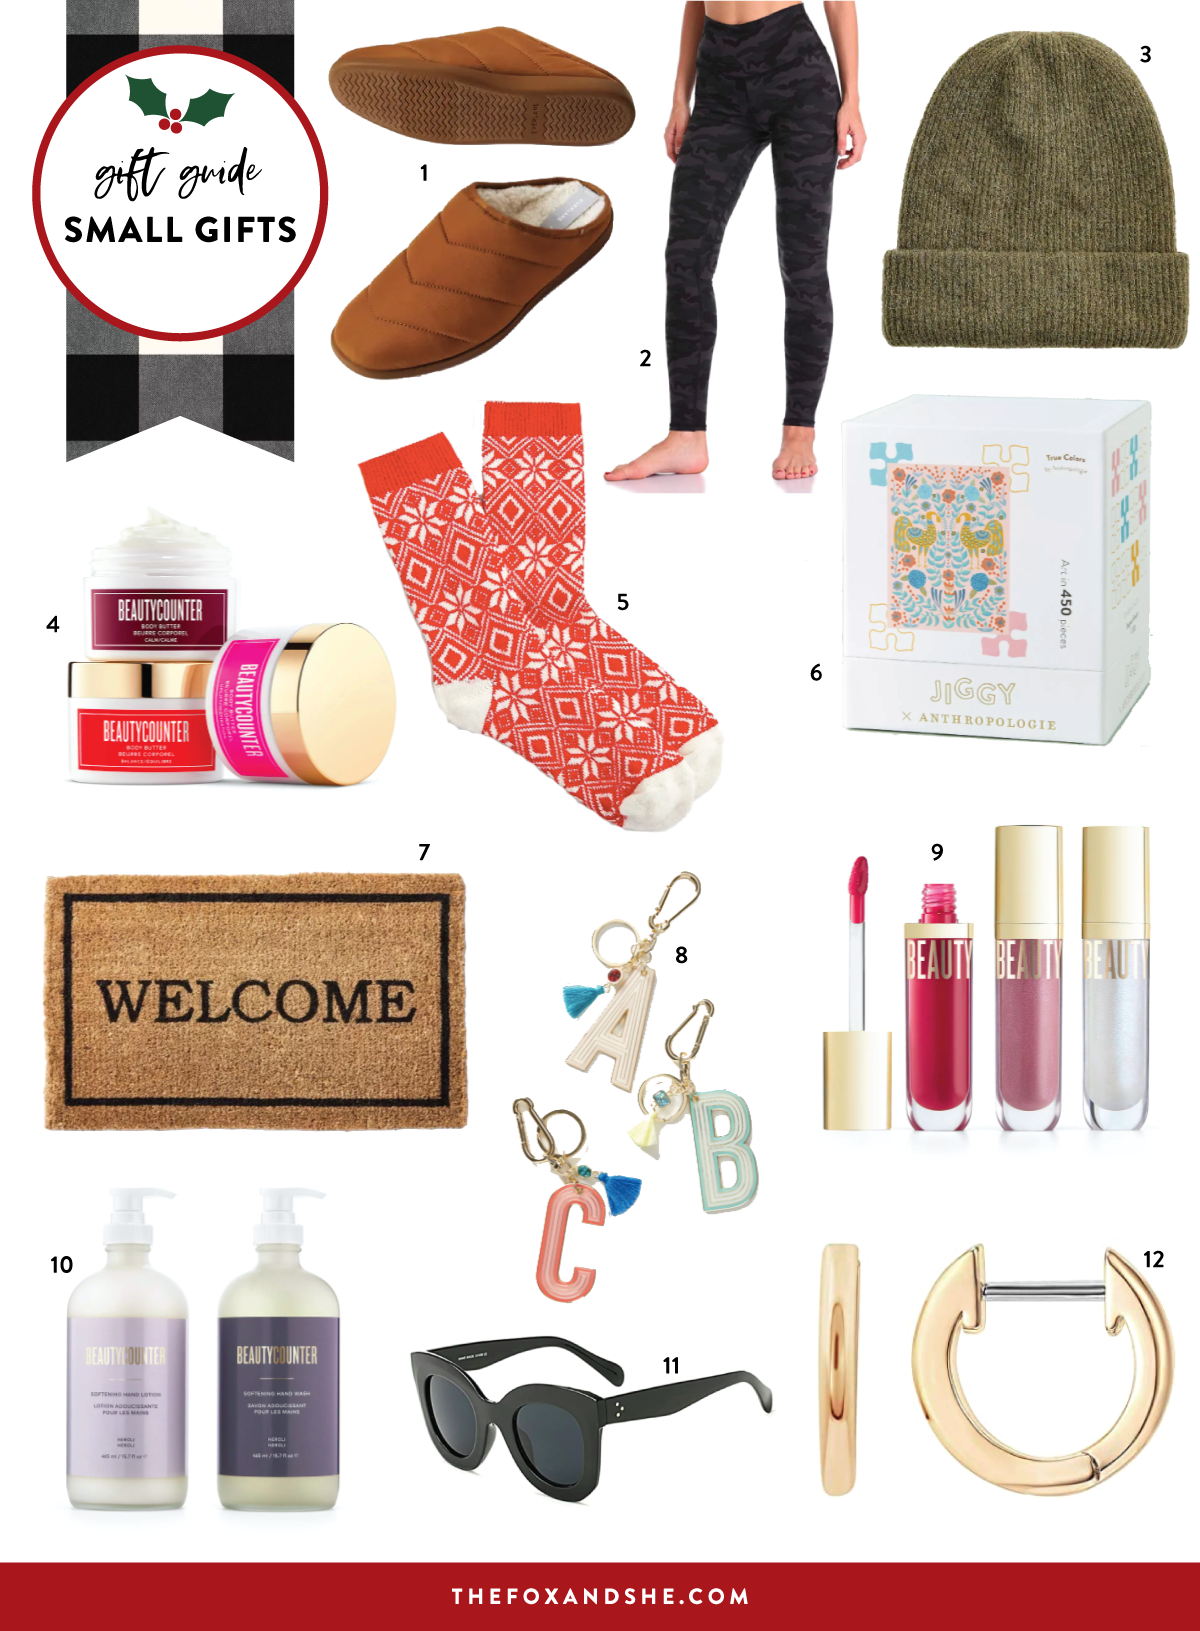 gift guide: stocking stuffers and small gifts, Gift Ideas for Women